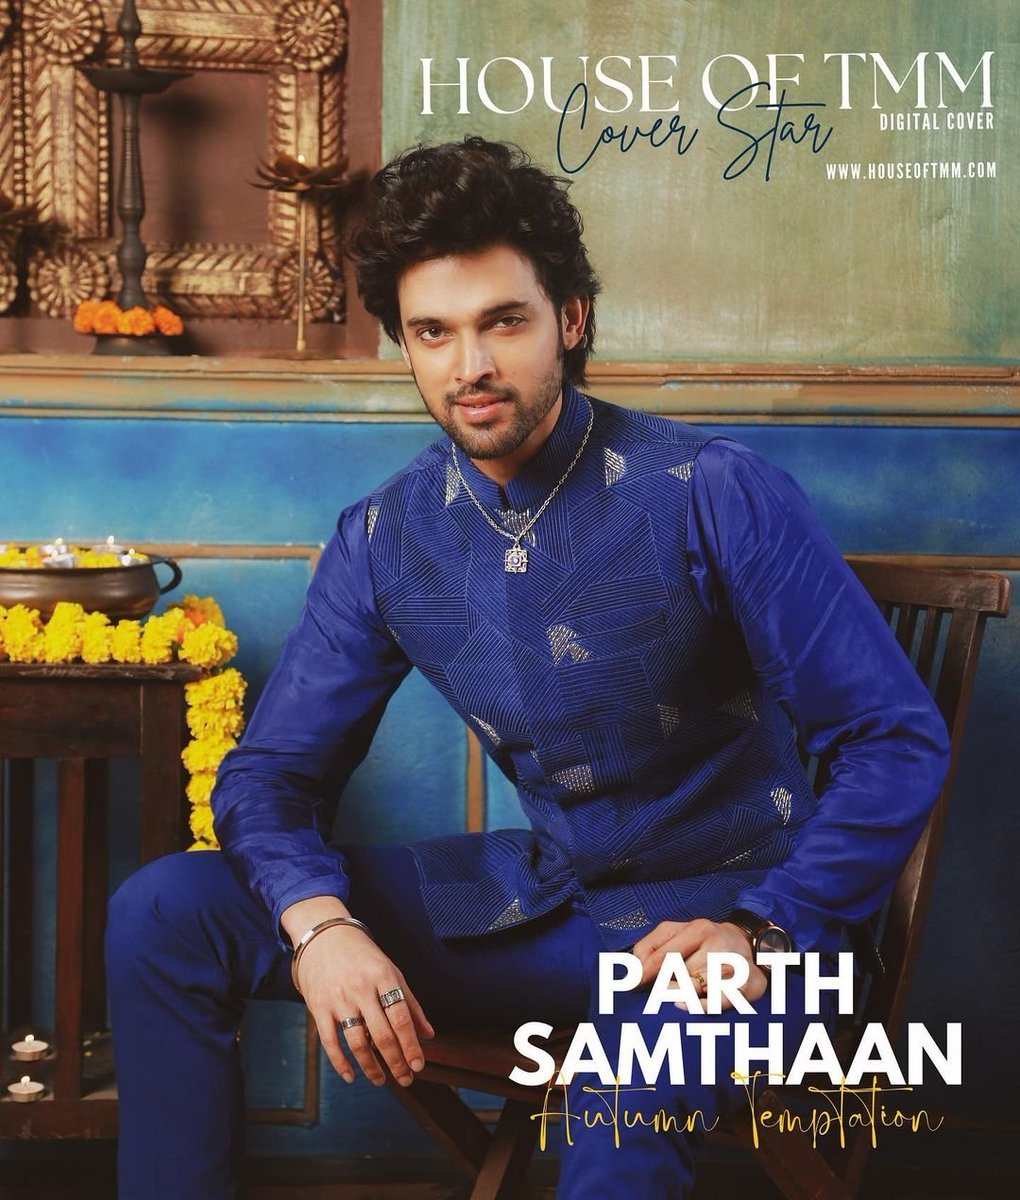 This Boiii in traditional attire is just 🔥🔥🔥🔥 #ParthSamthaan #traditionaloutfit